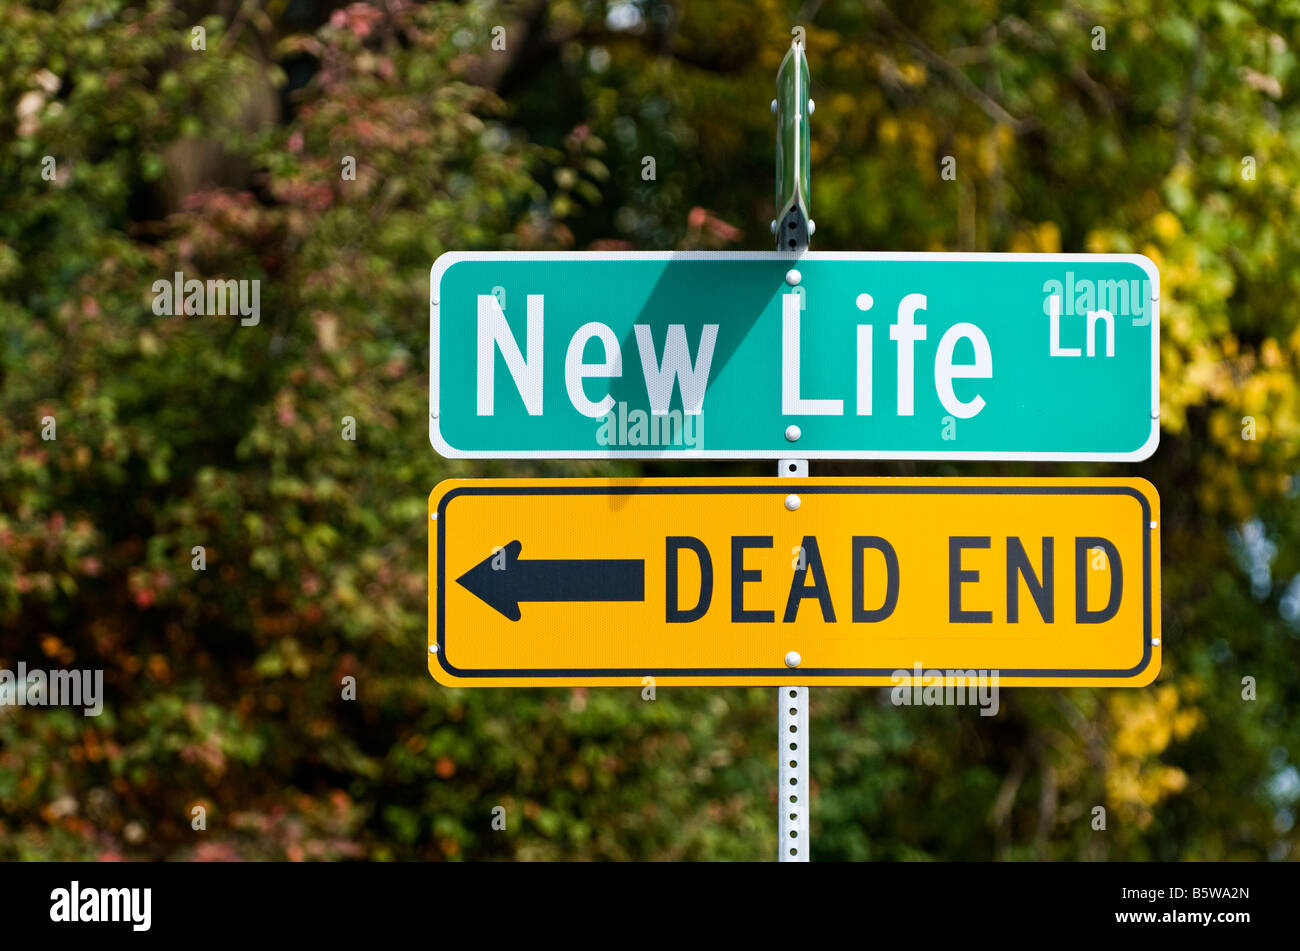 New Life street sign with Dead End sign below Stock Photo